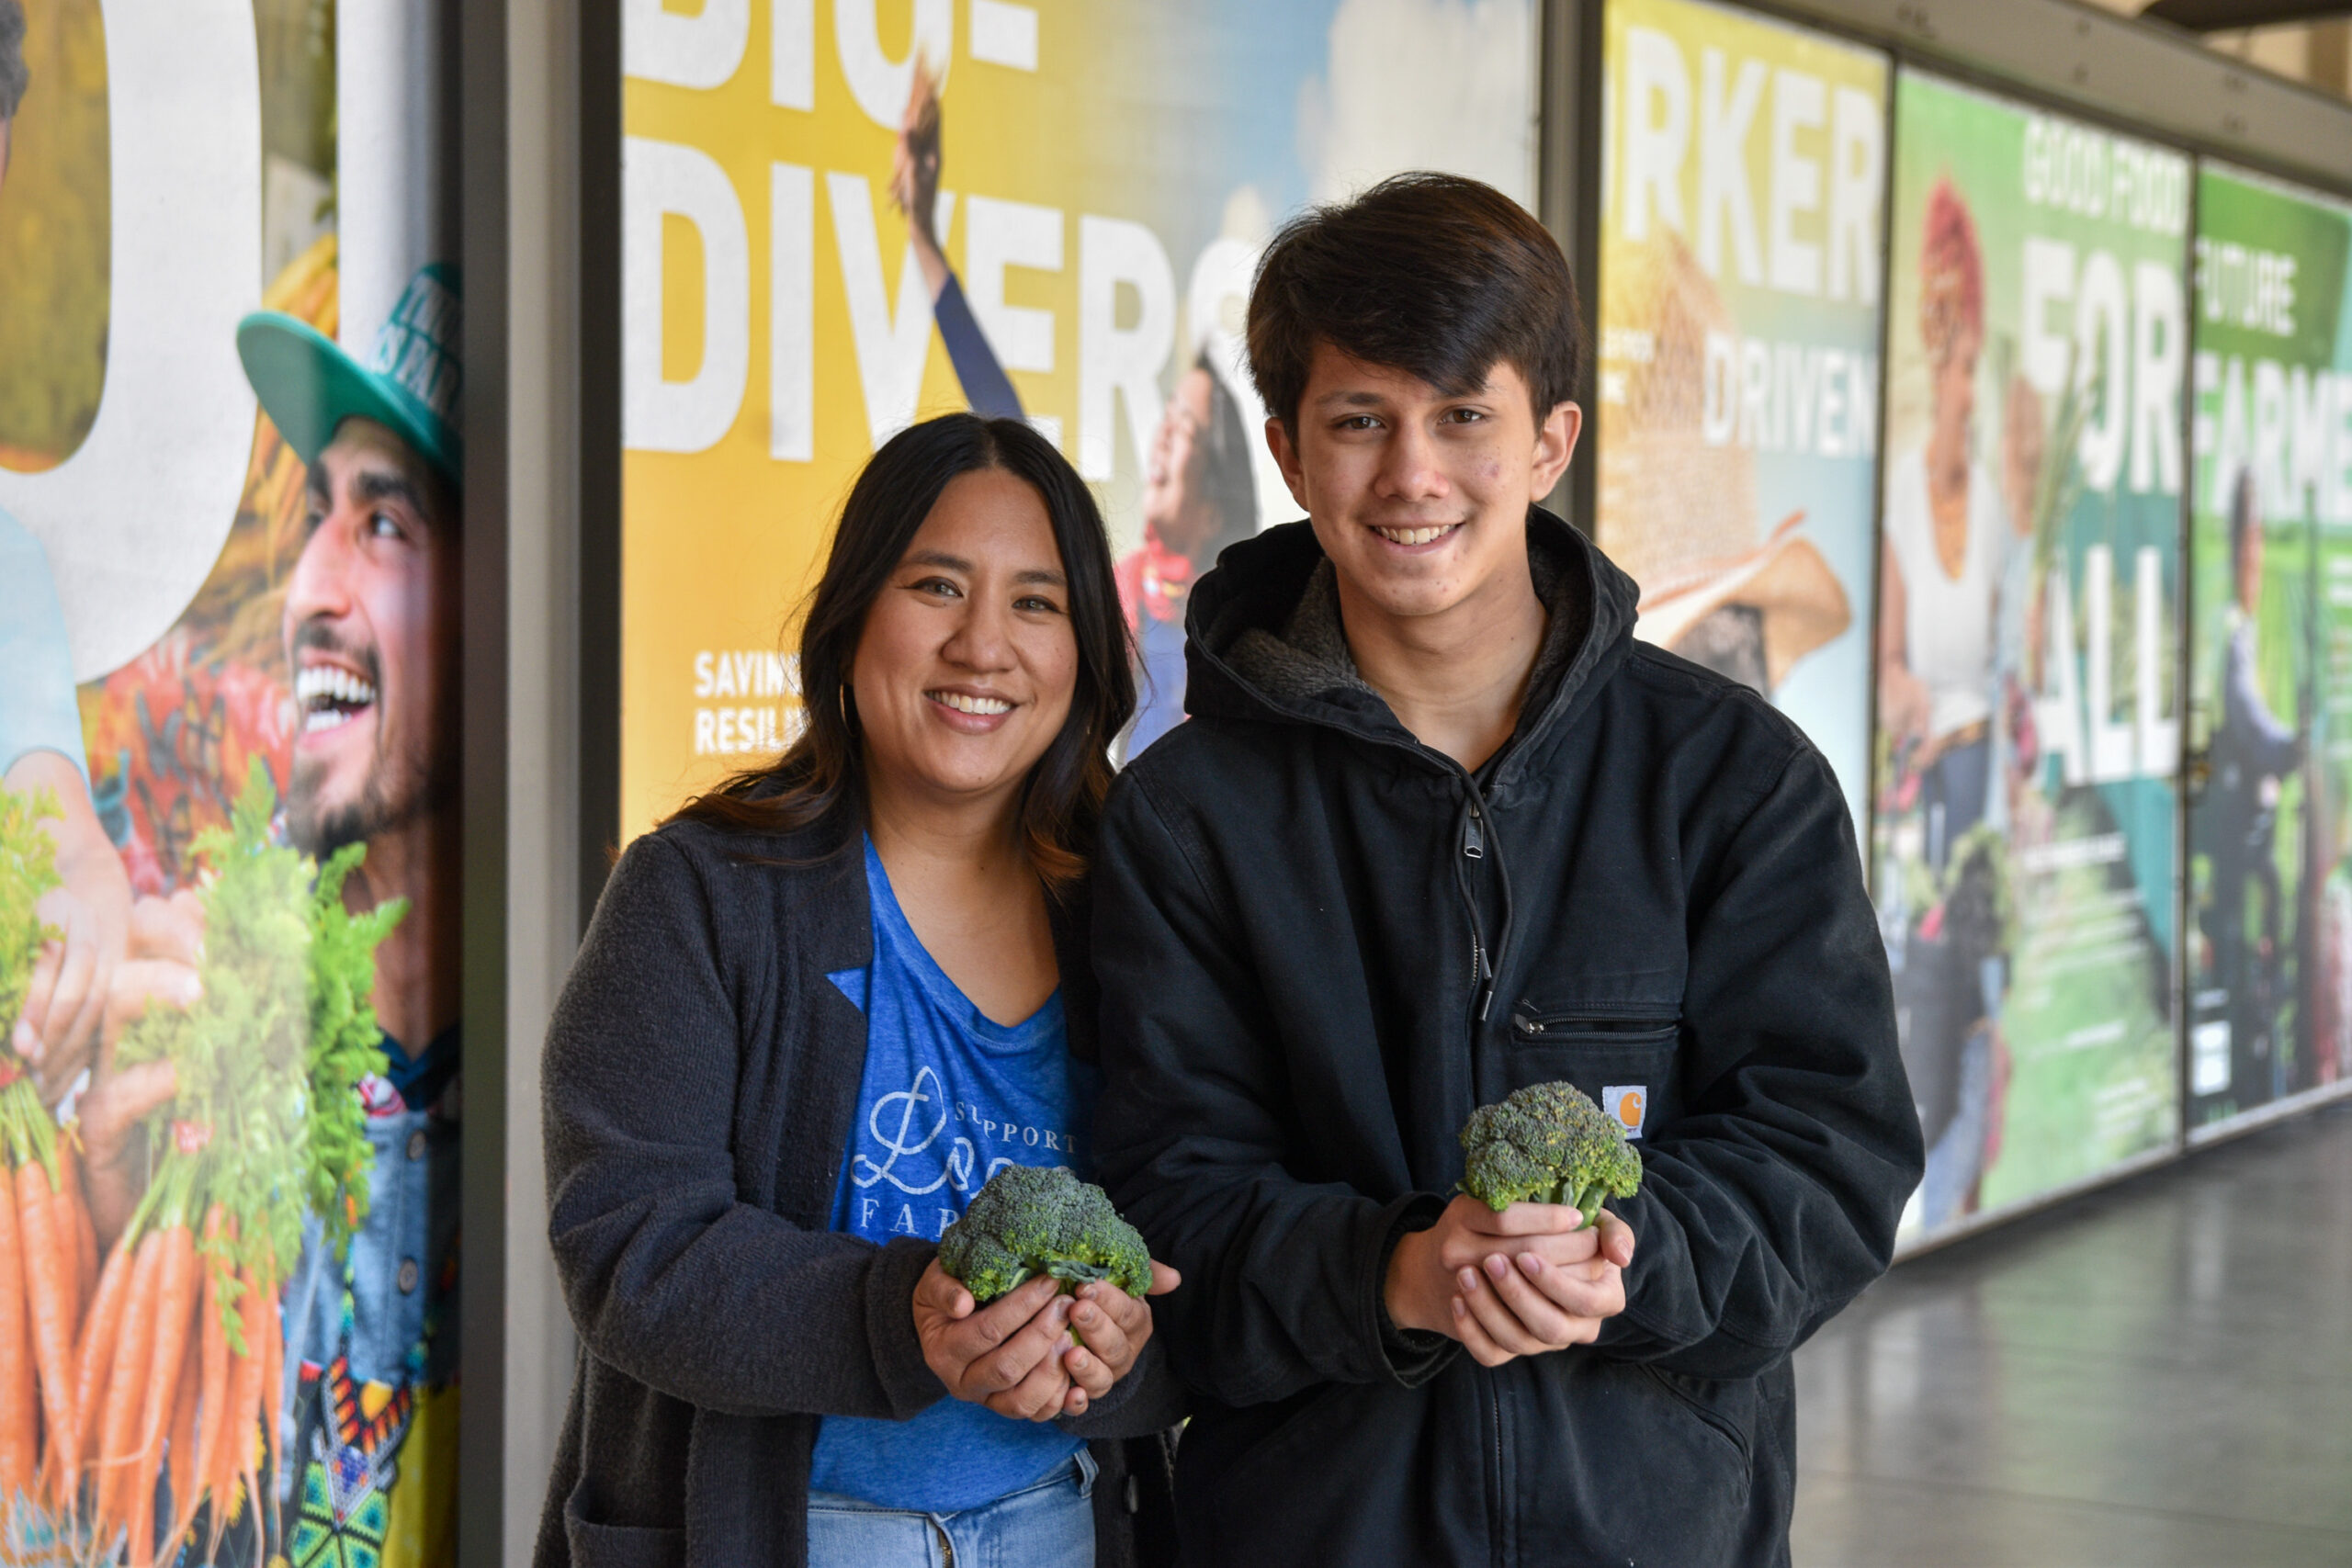 Leslie and Josiah, holding vegetables, in front of The Food Change photo murals